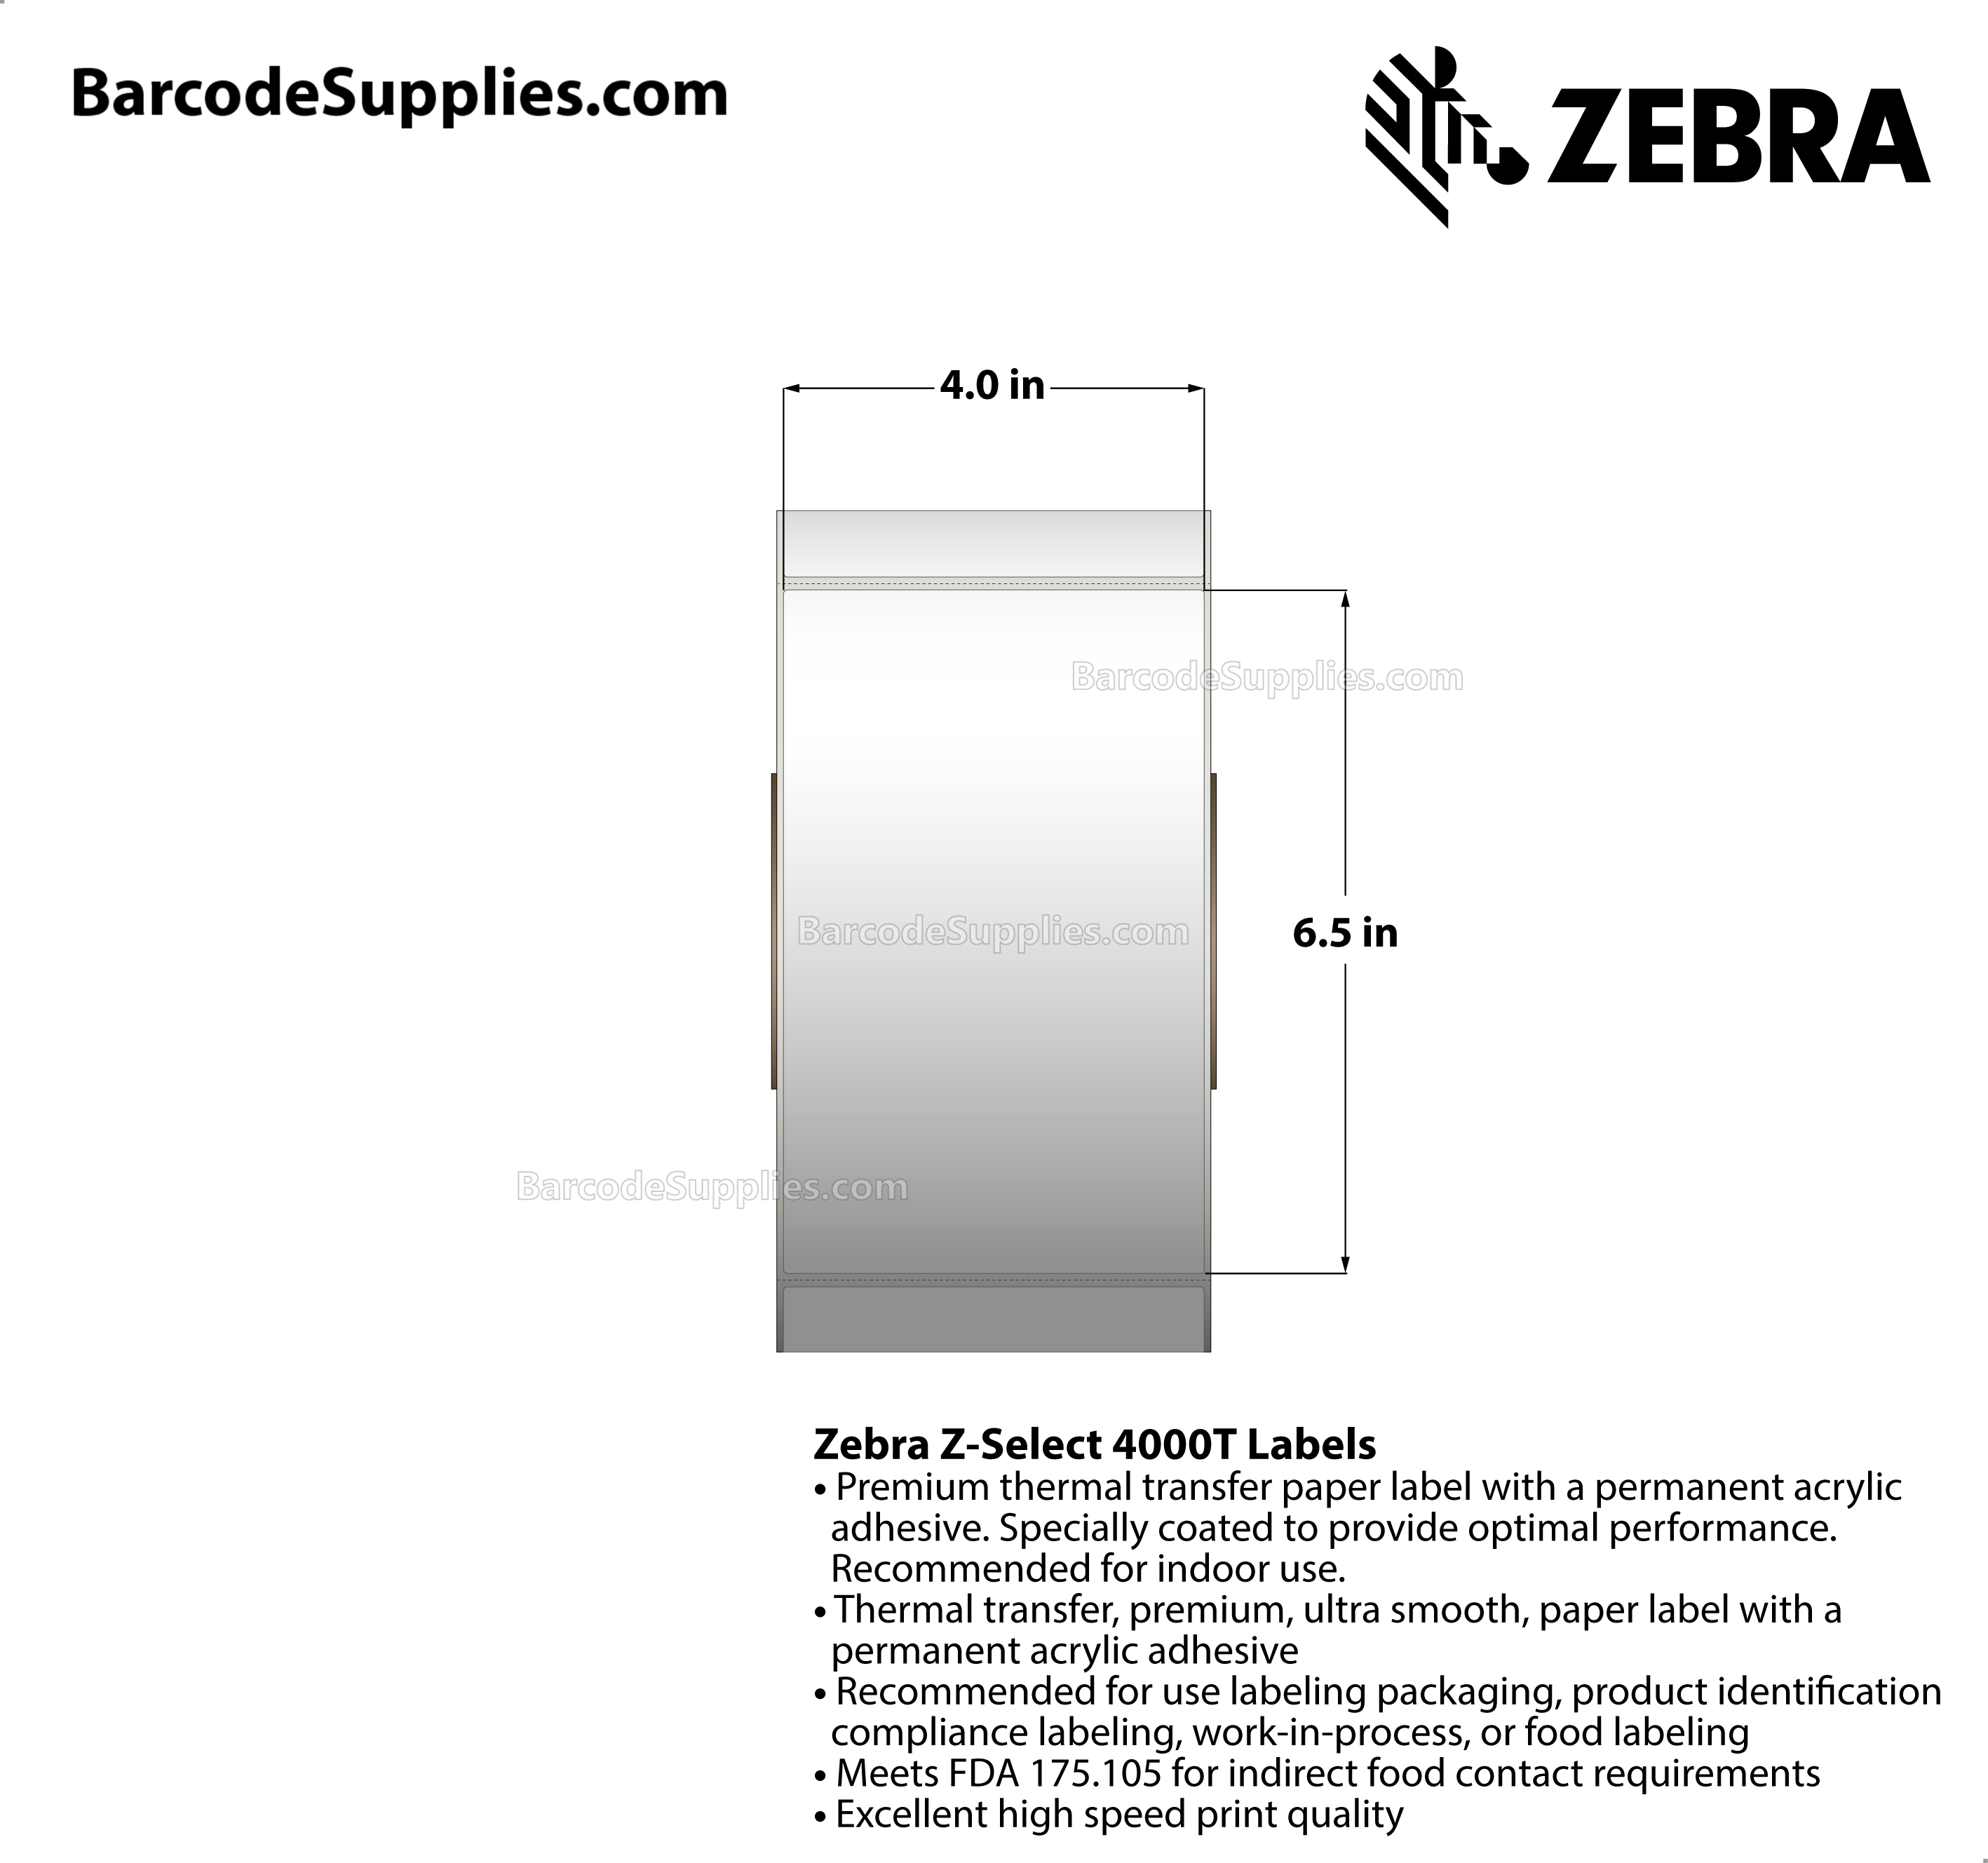 4 x 6.5 Thermal Transfer White Z-Select 4000T Labels With Permanent Adhesive - Perforated - 840 Labels Per Roll - Carton Of 4 Rolls - 3360 Labels Total - MPN: 73298